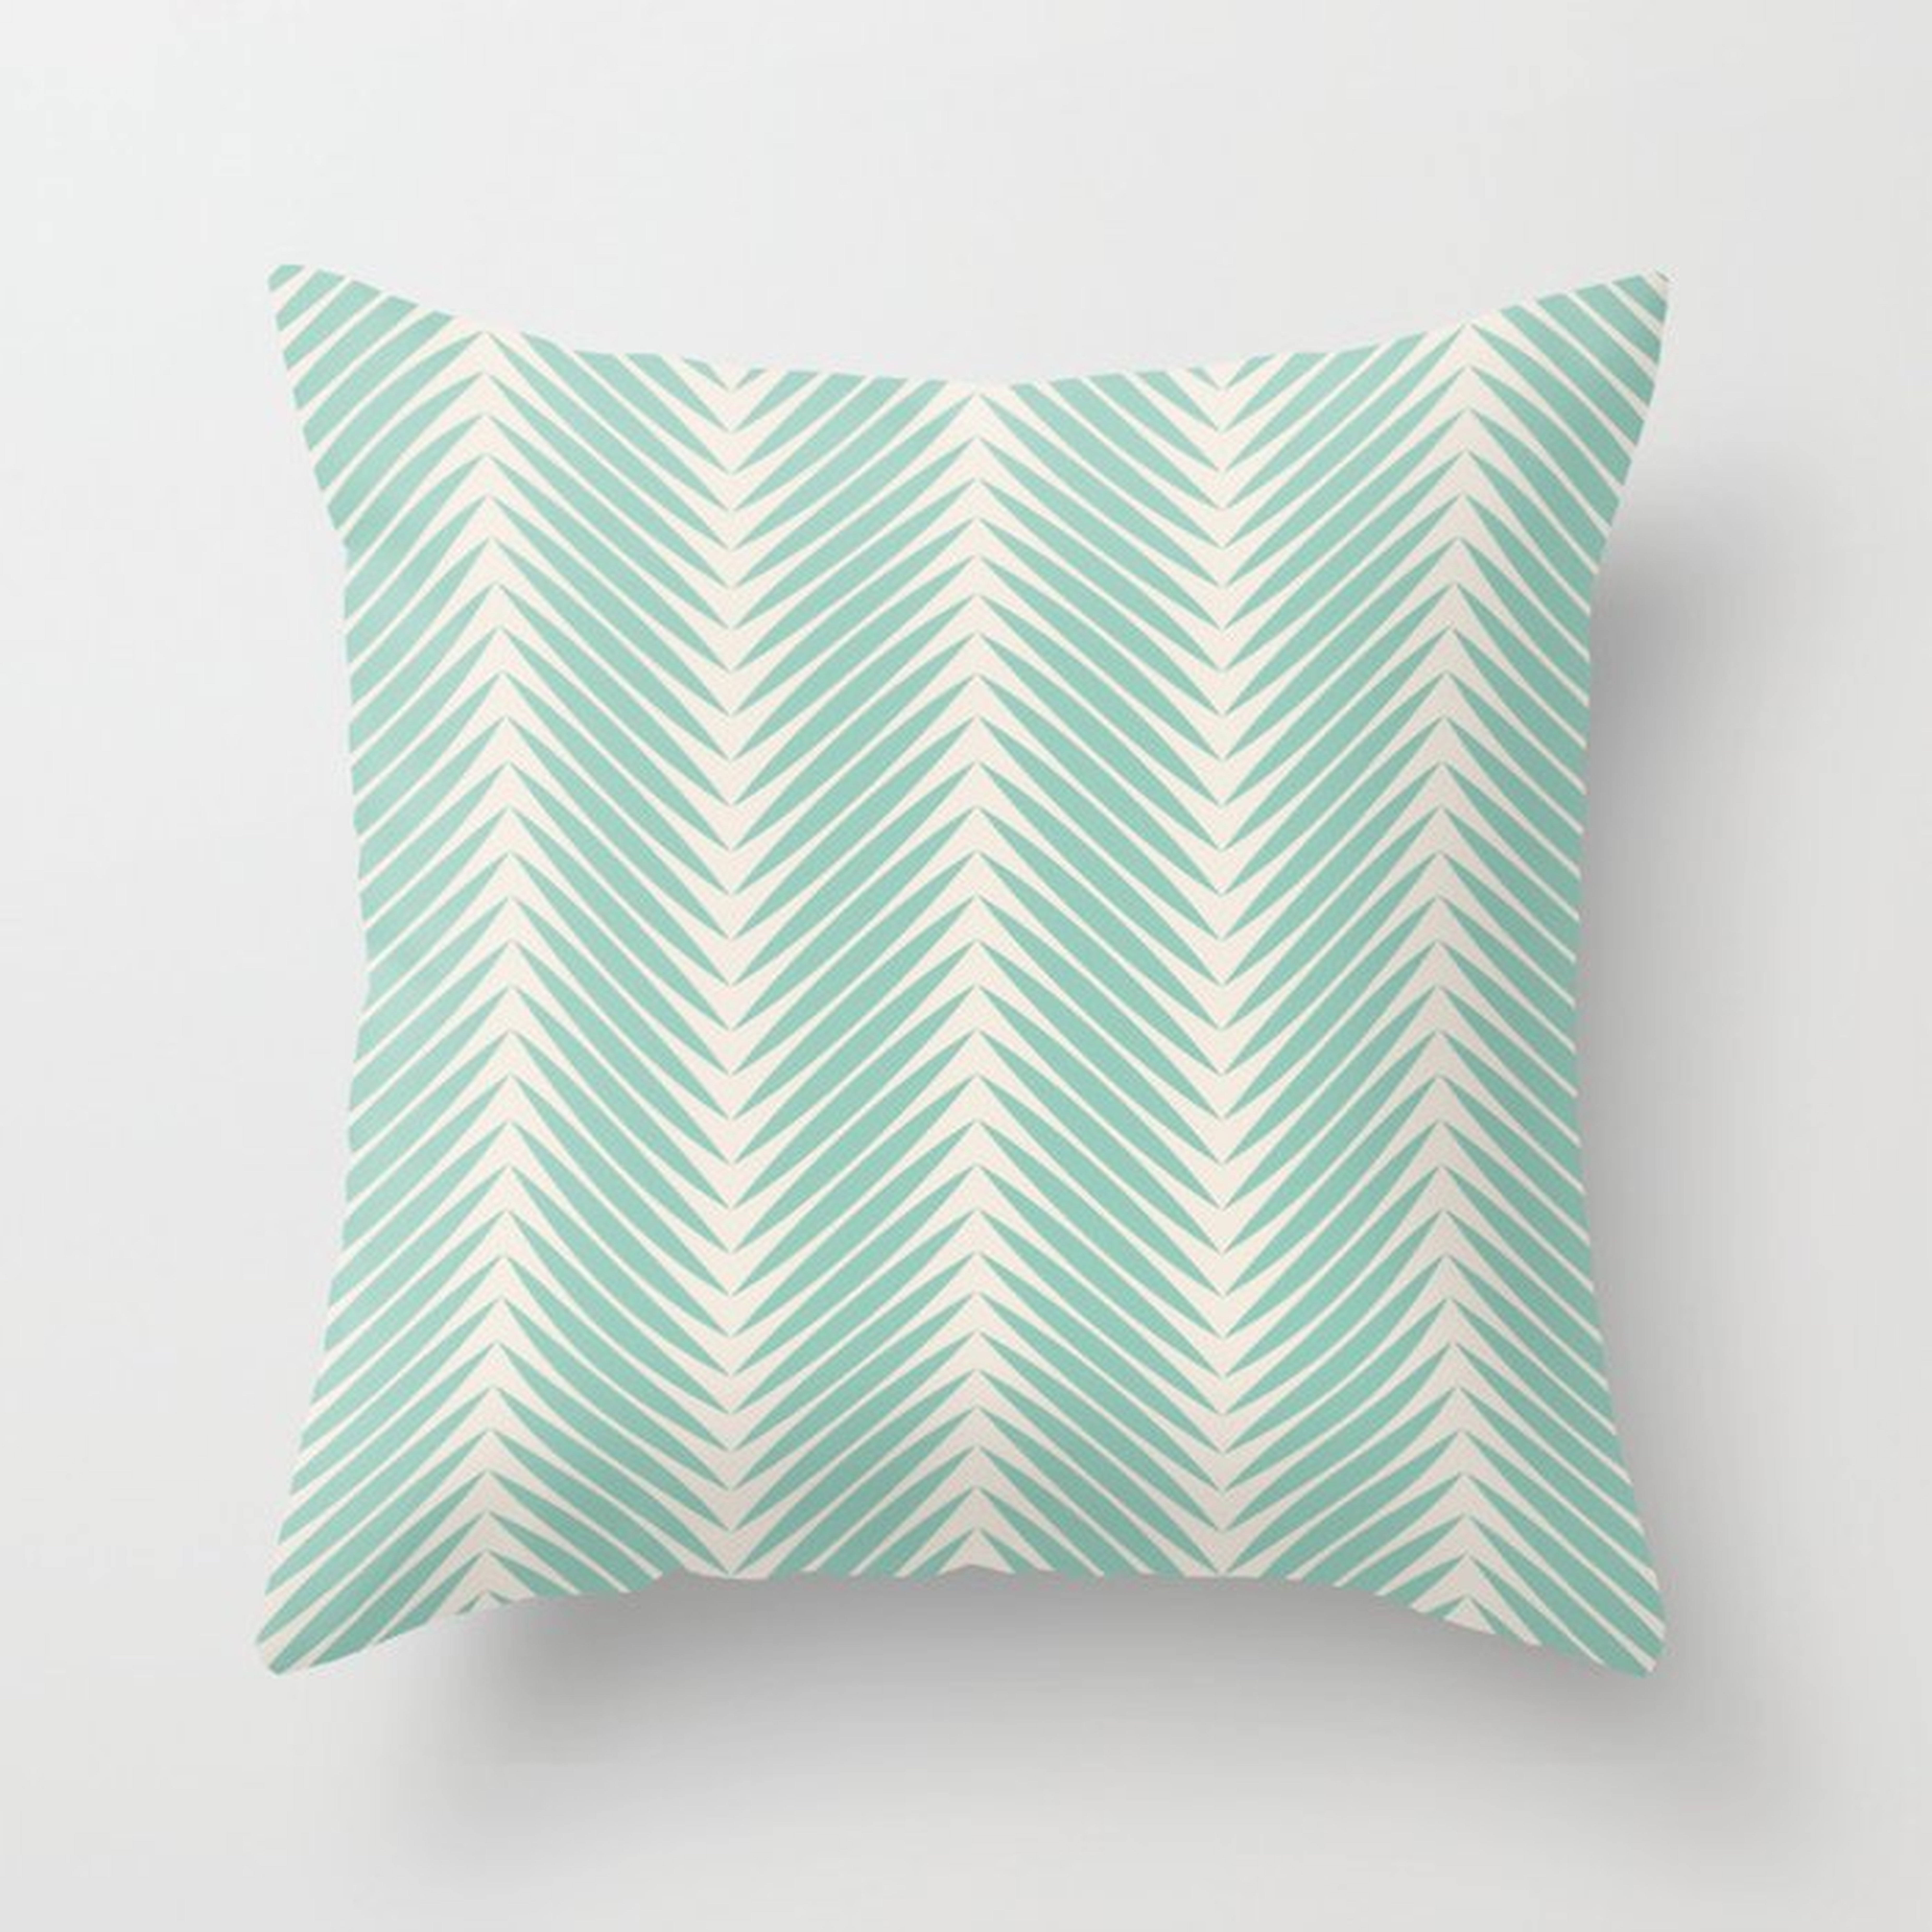 Palm Symmetry - Teal Throw Pillow - Indoor - Cover (18" X 18") With Pillow Insert - Society6